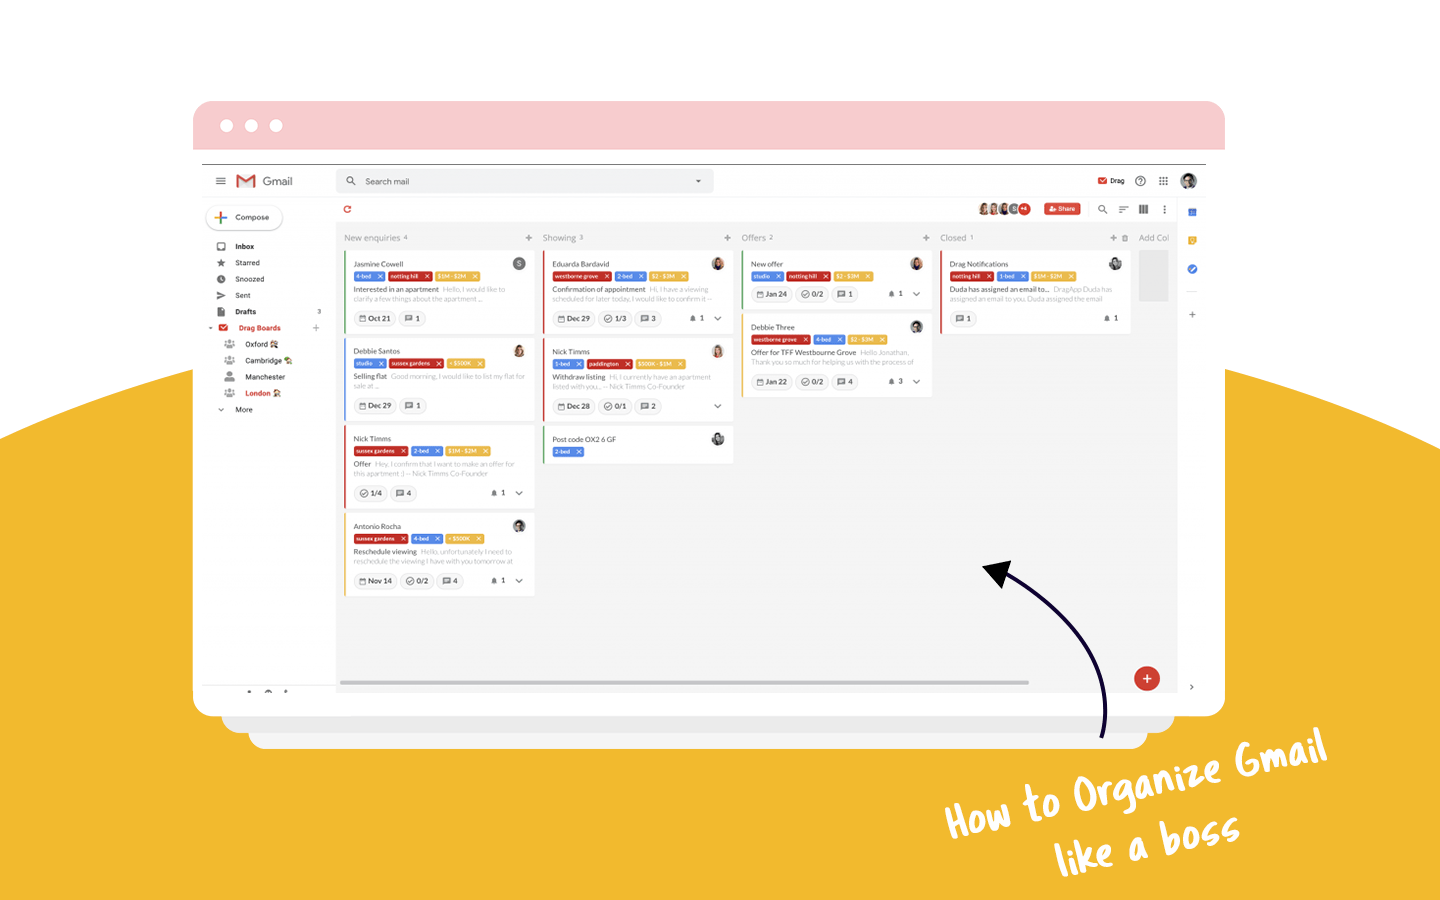 How To Schedule An Email In Gmail 2022 How To Organize Gmail Like A Boss | Dragapp.com